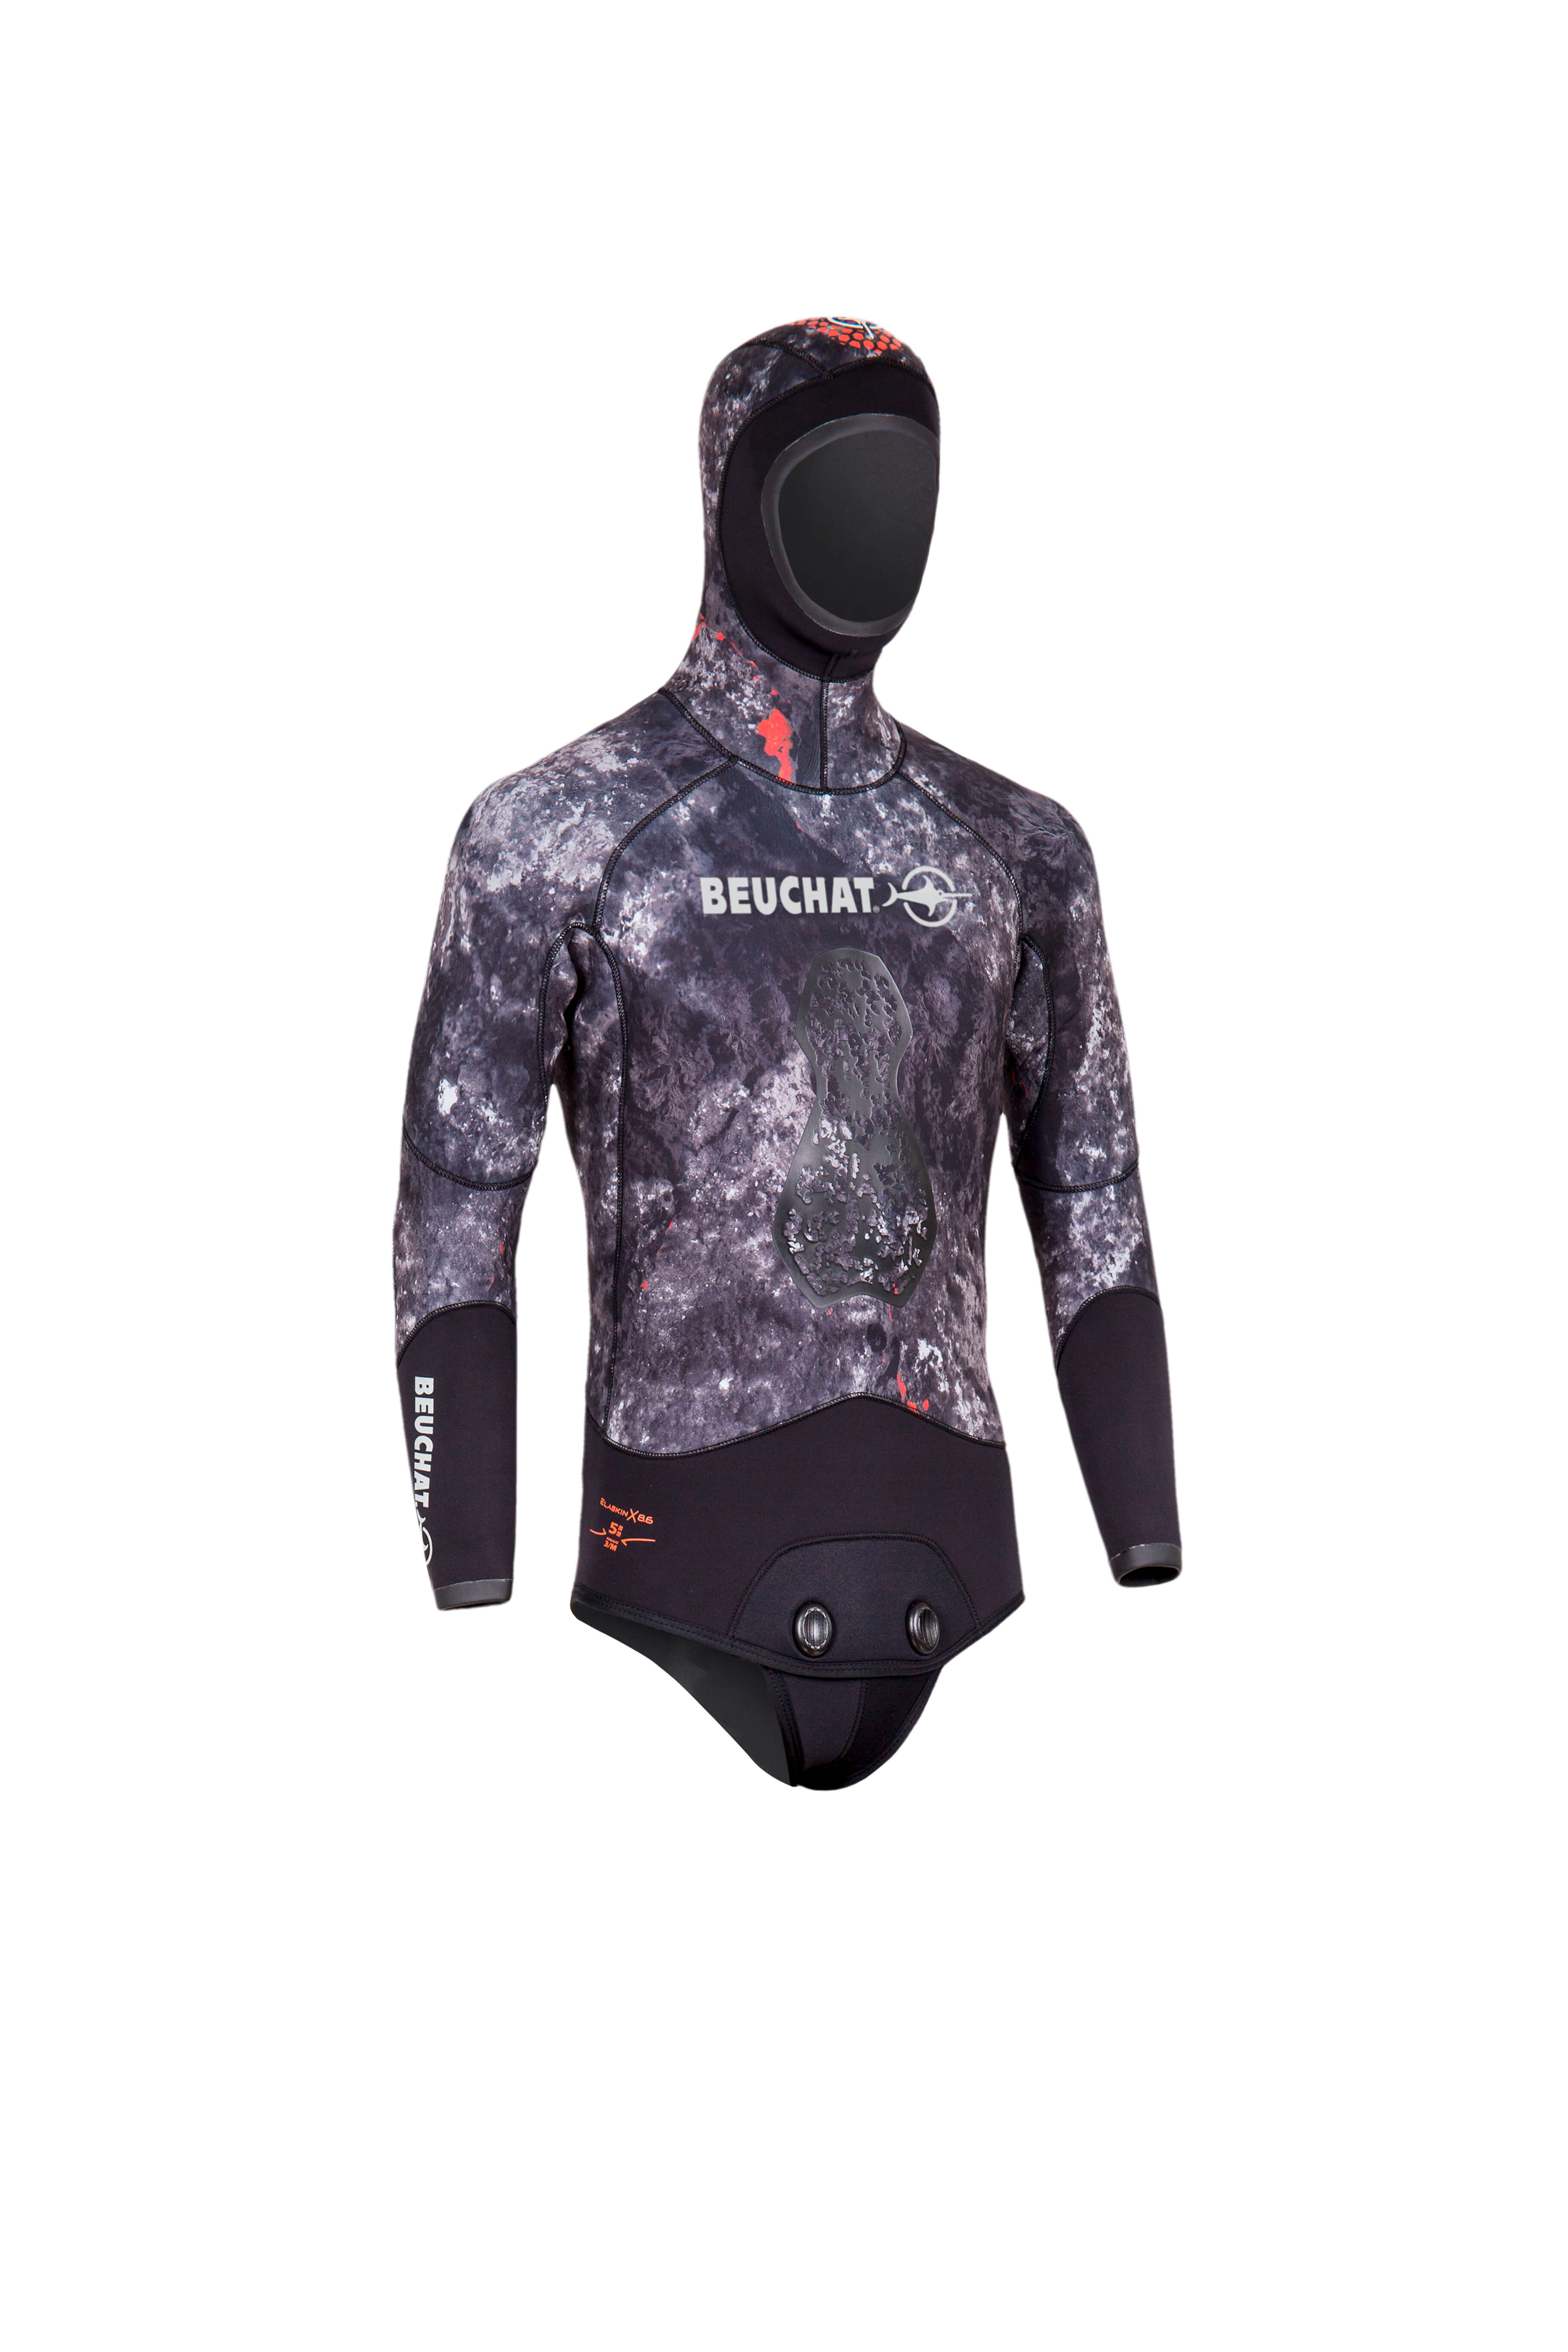 Beuchat Trigoblack 7mm Opencell Jacket